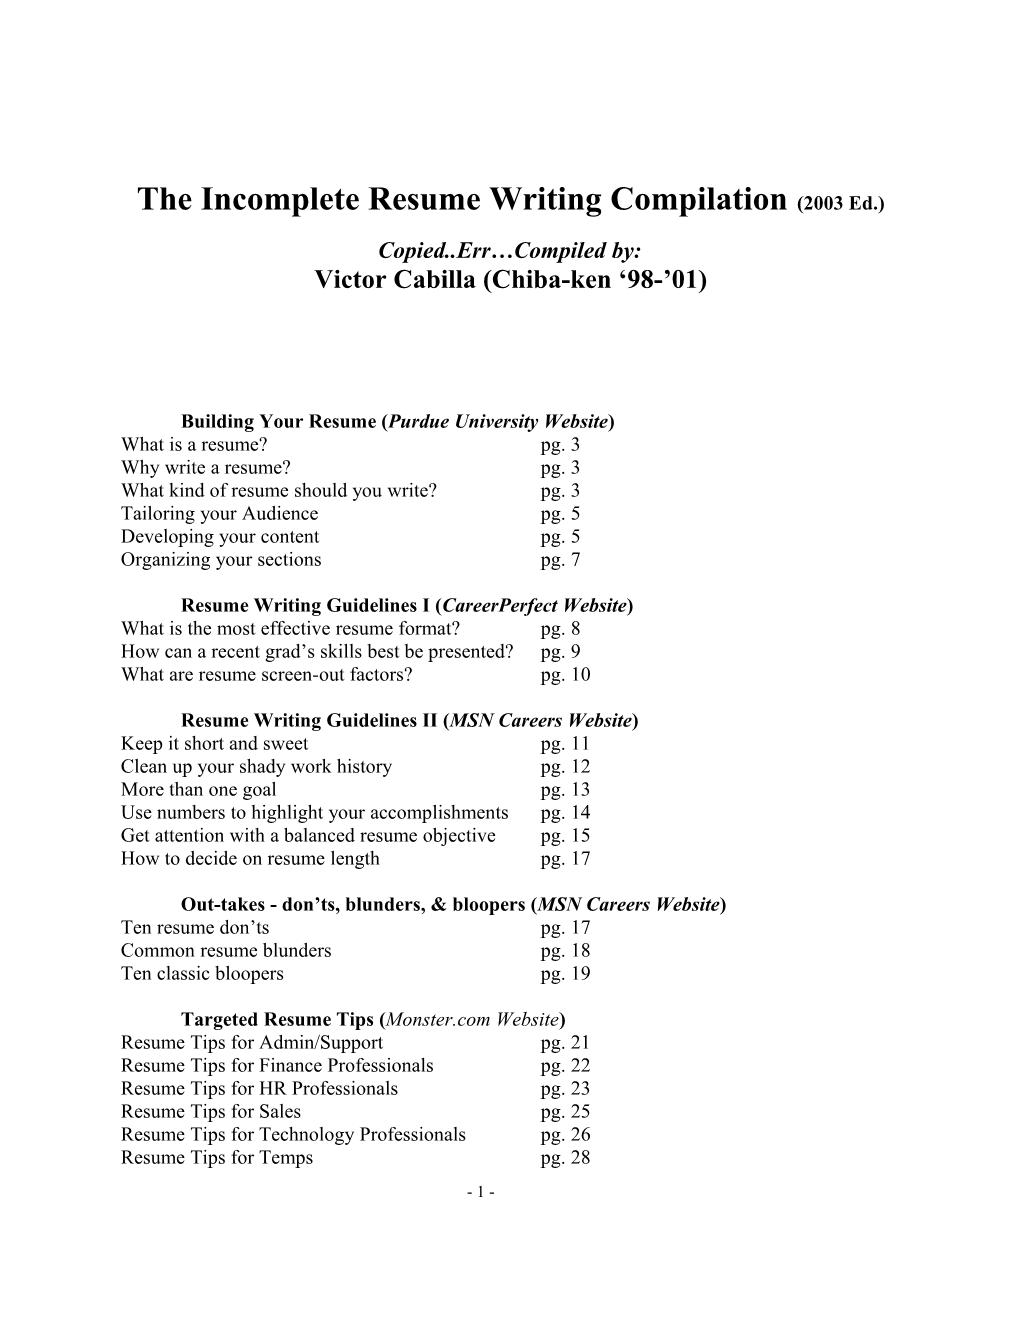 The Incomplete Resume Writing Compilation (2003 Ed.)